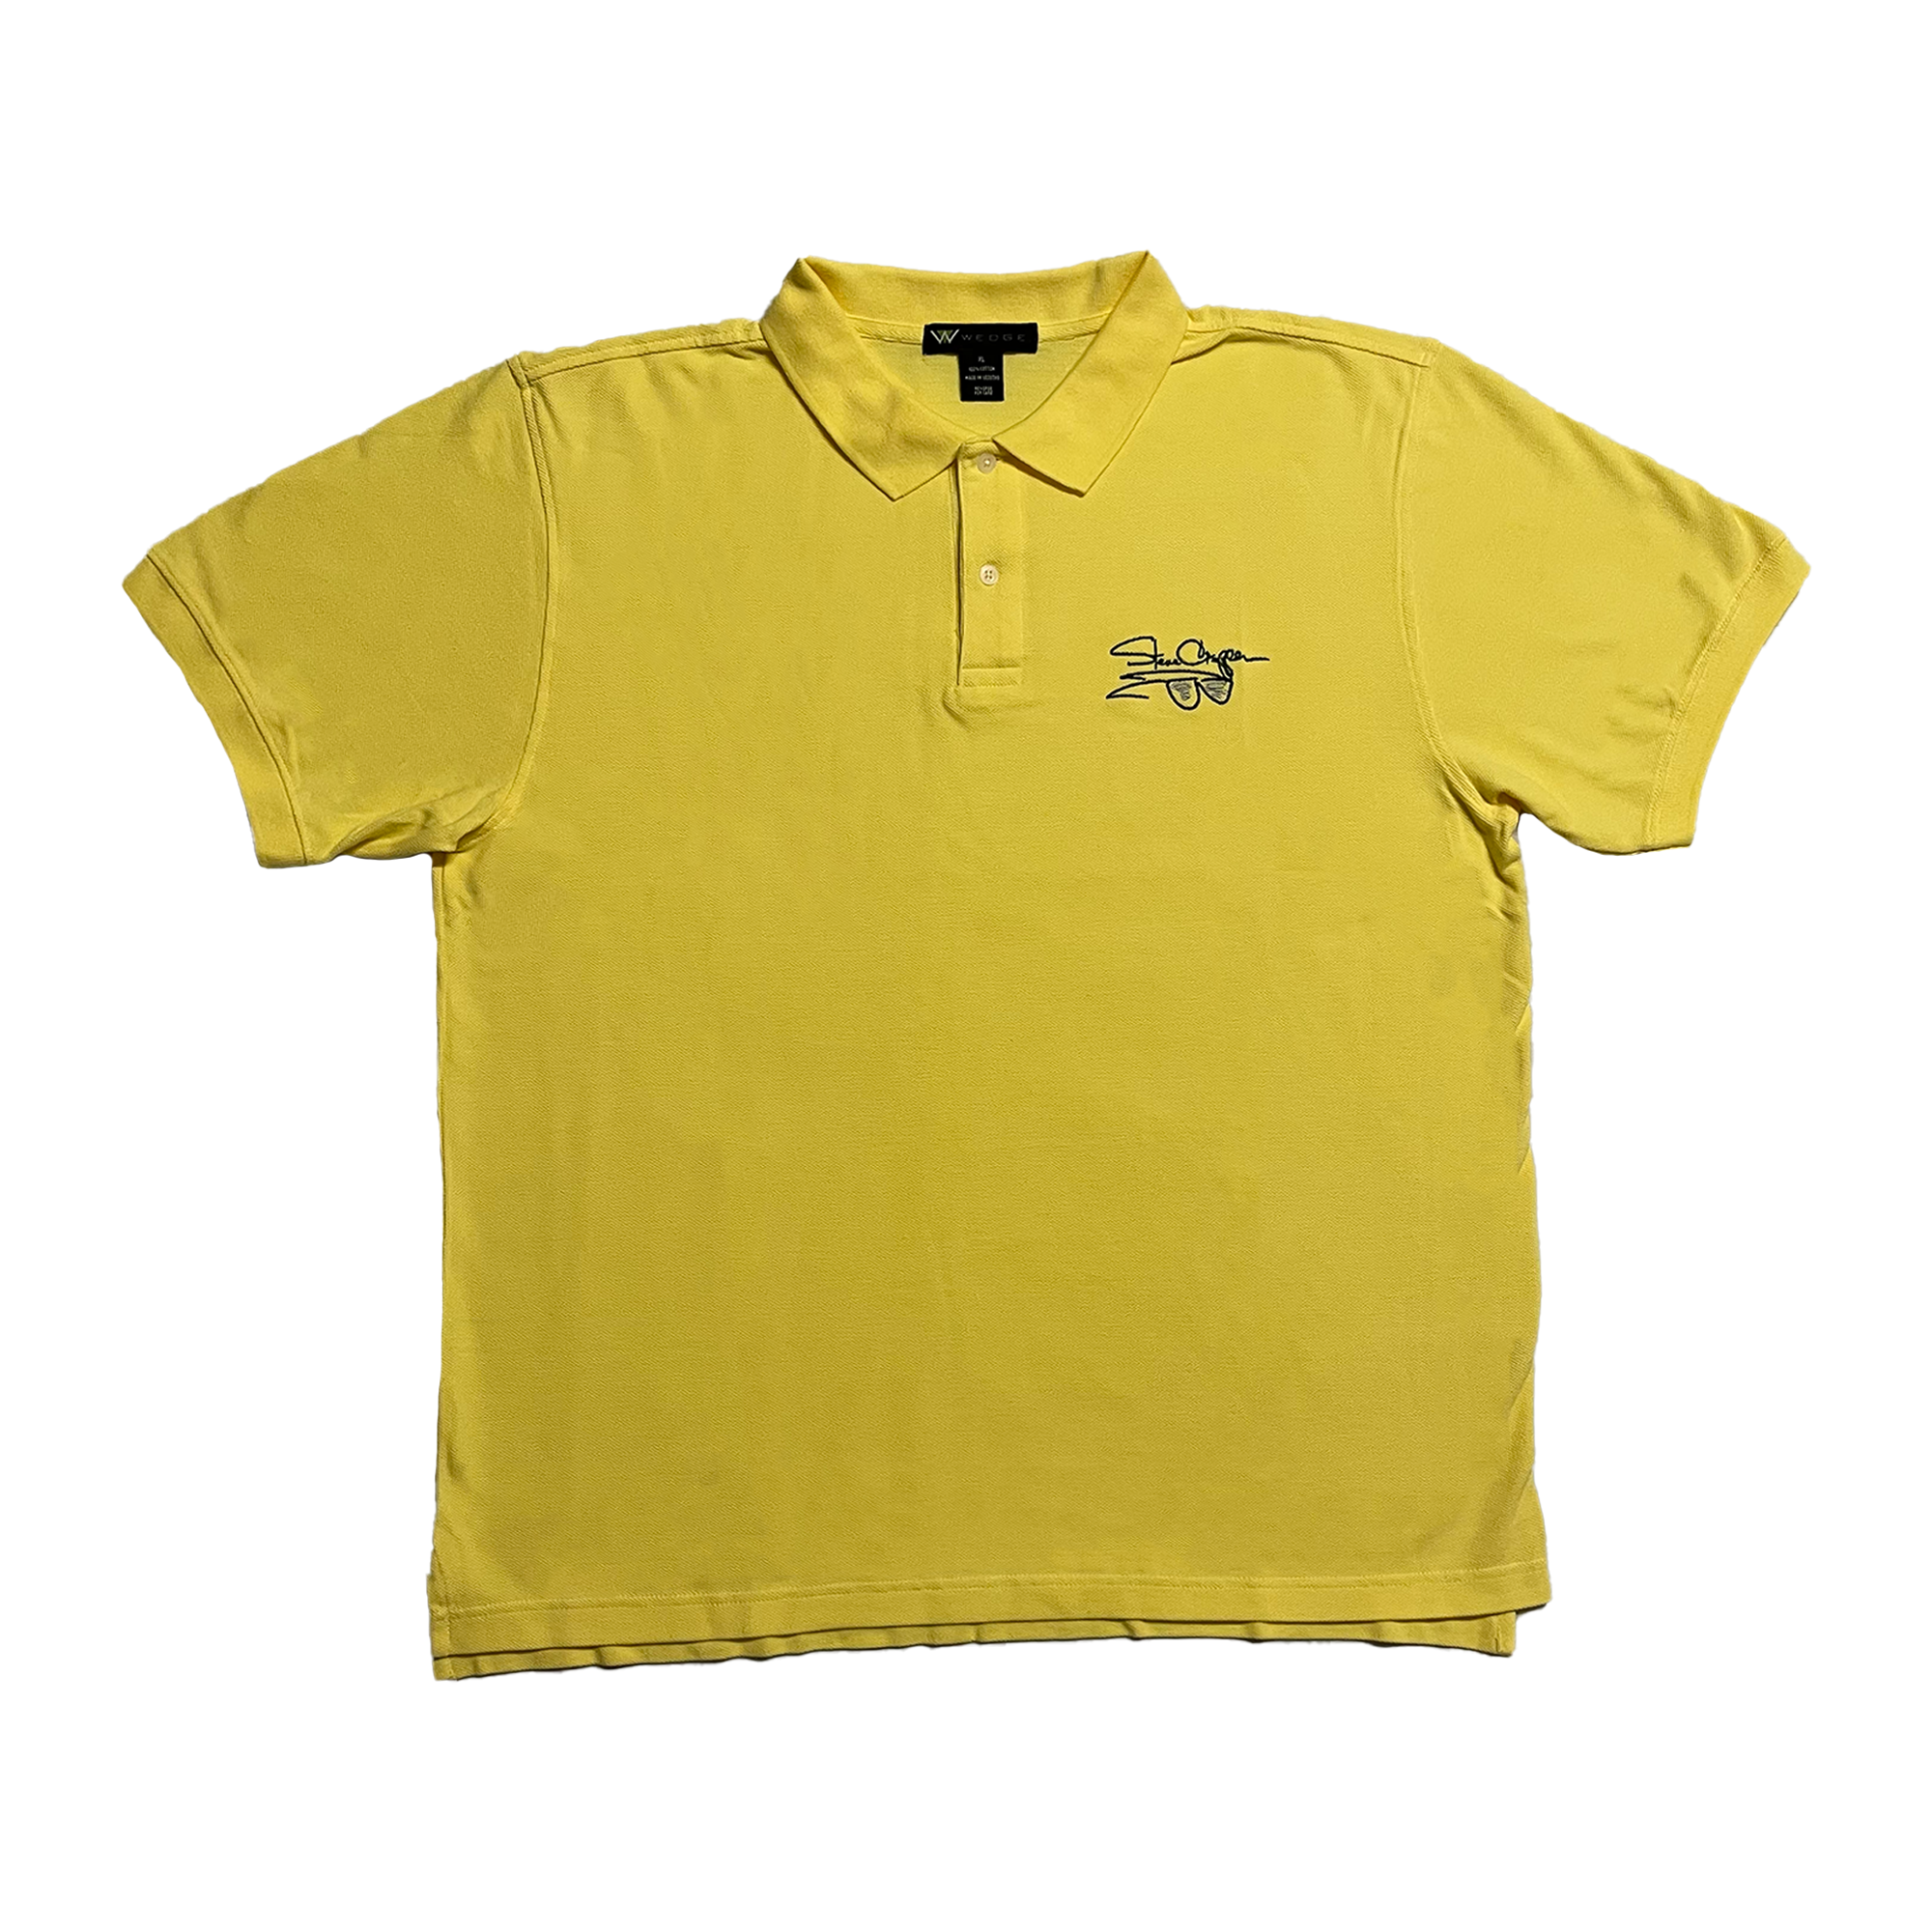 Steve Cropper - Embroidered Yellow Polo Shirt